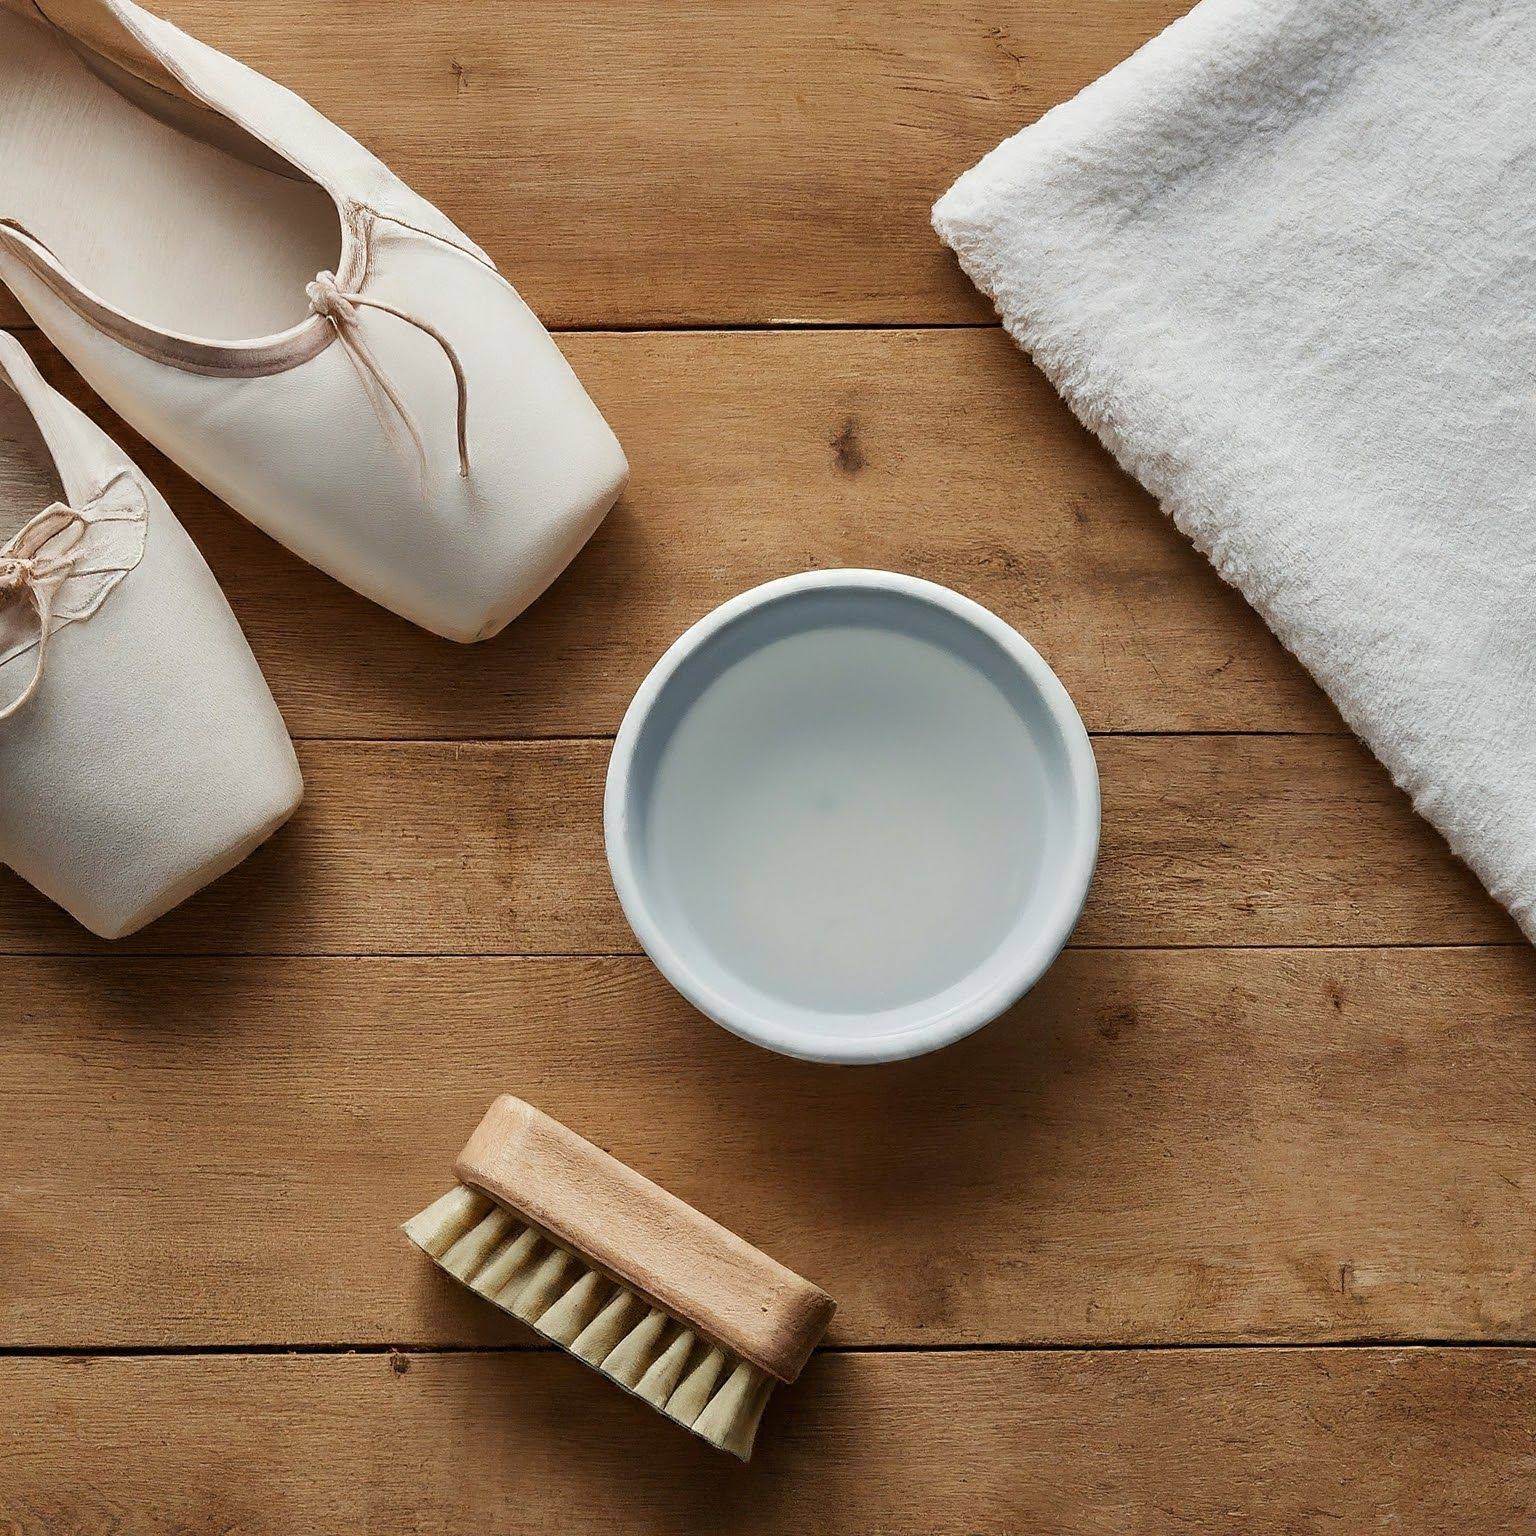 How to Clean Ballerina Shoes: The Essential Guide